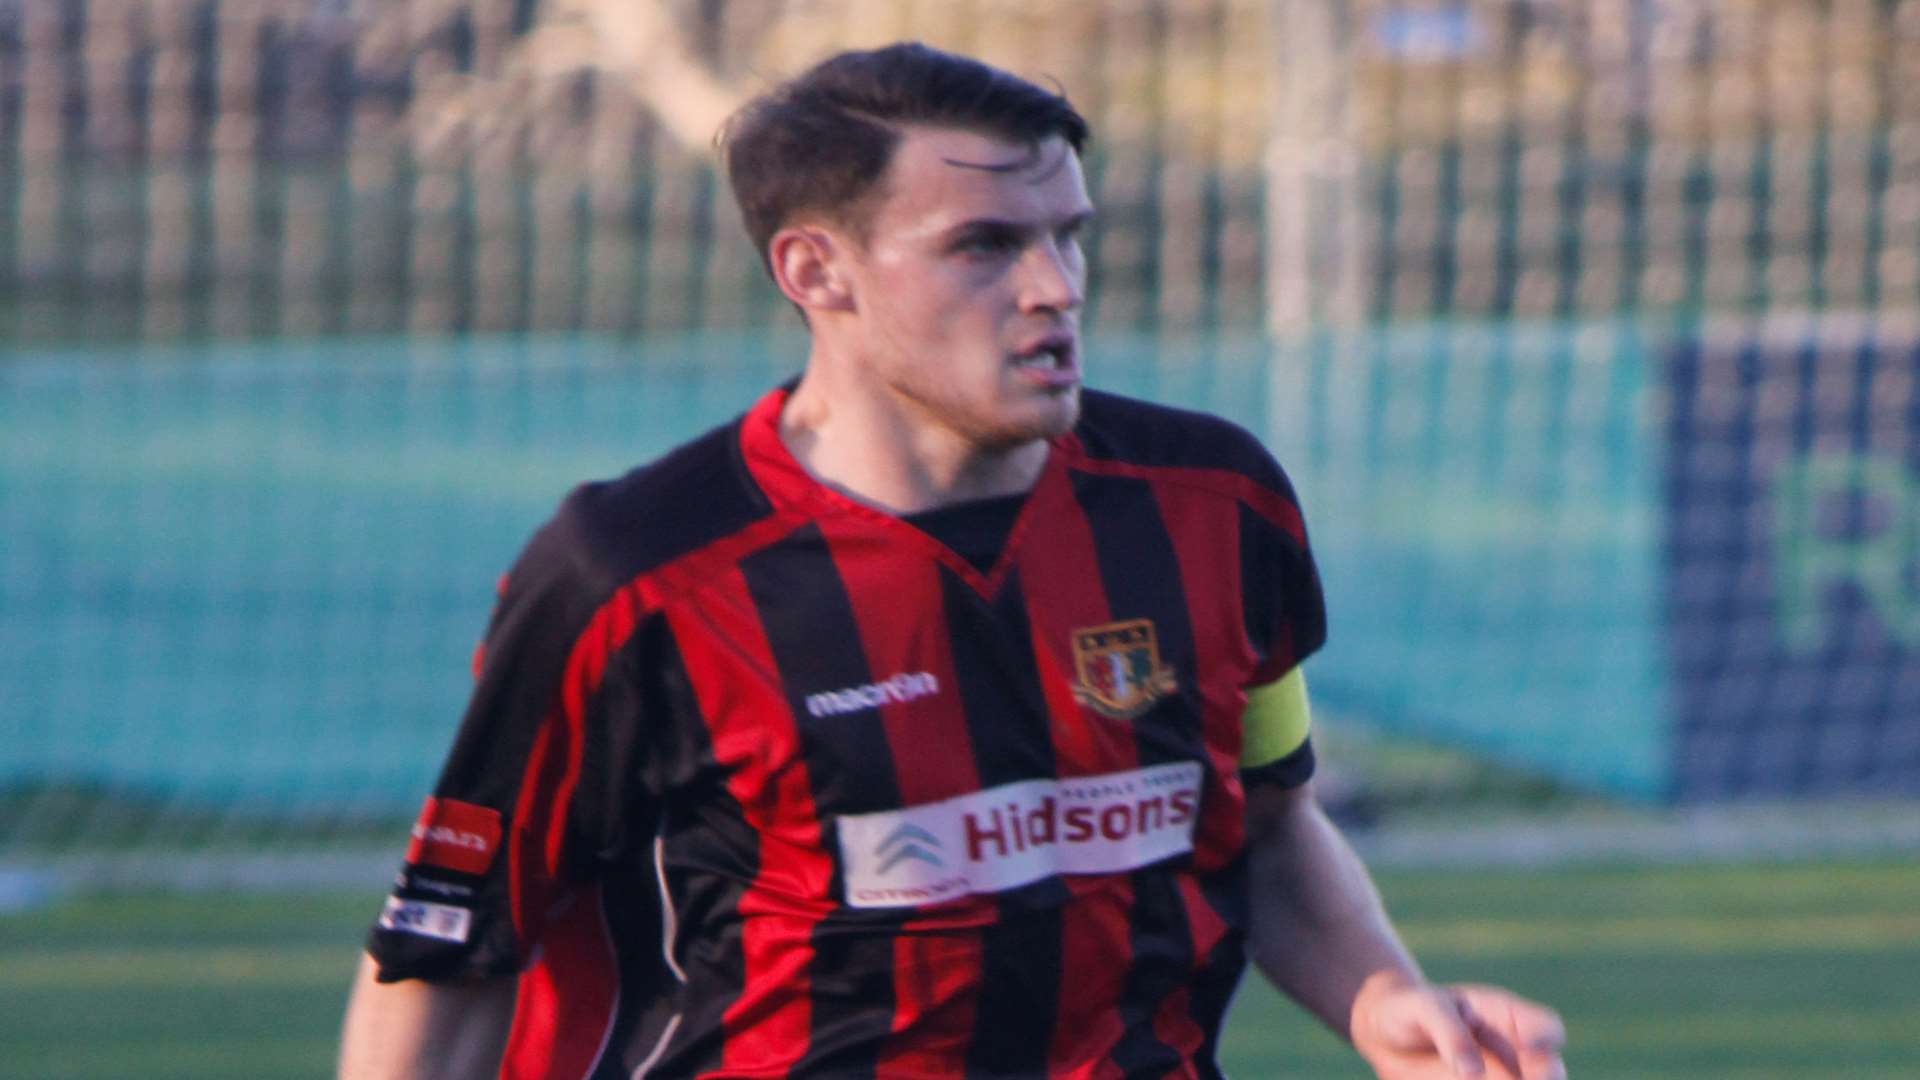 Sittingbourne captain Tom Brunt is among 10 players to sign a new deal Picture: Darren Small